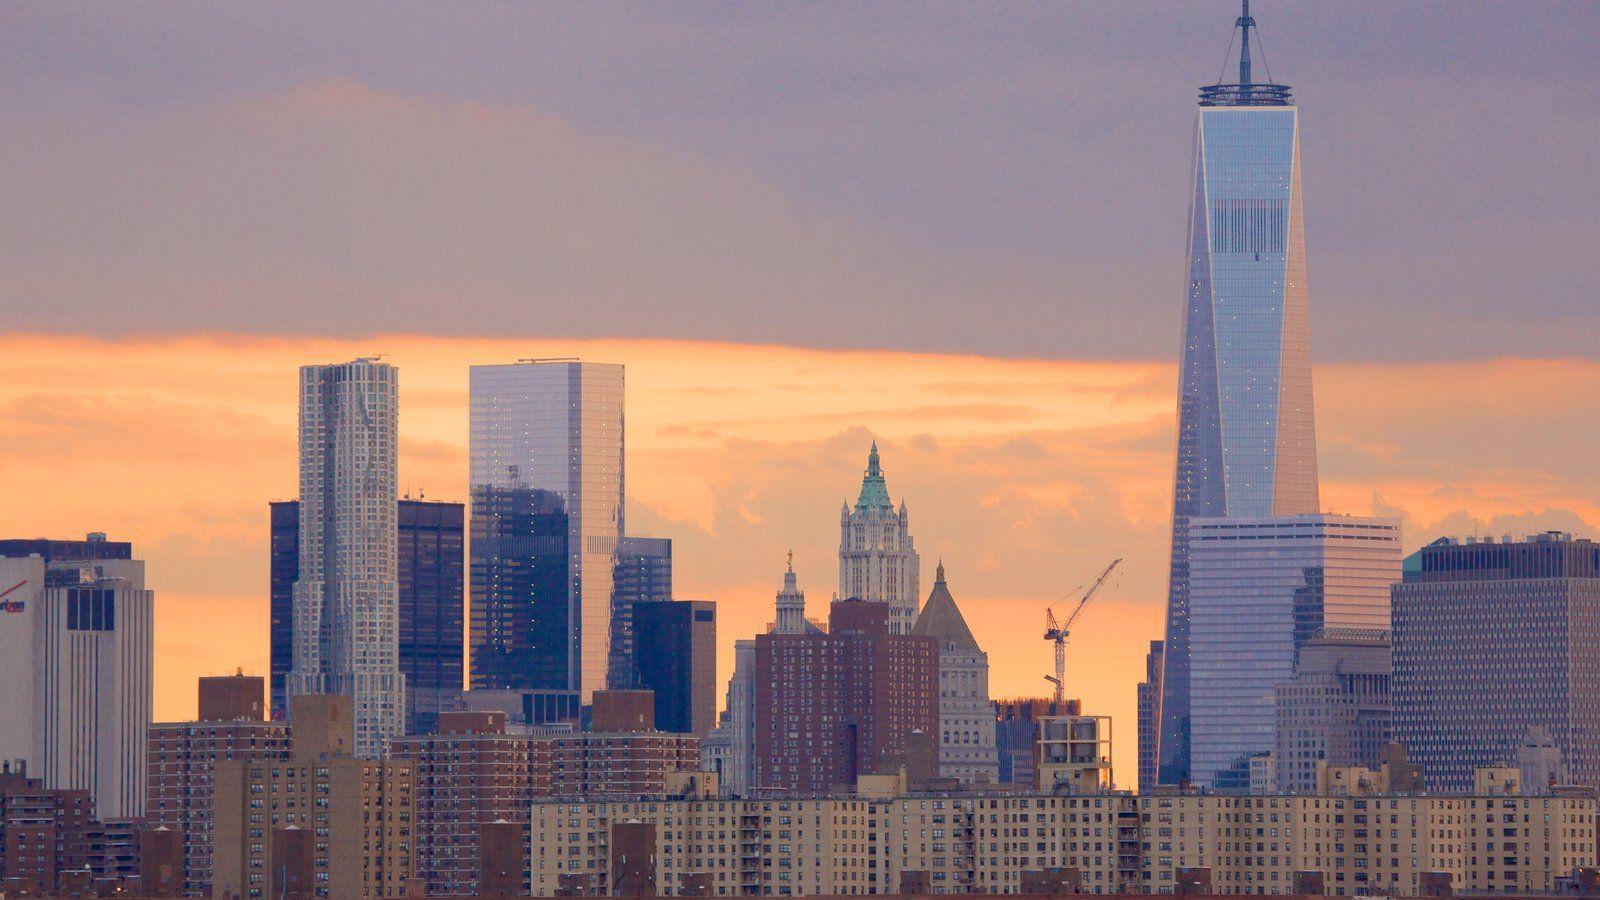 Sunset & Sunrise Picture: View Image of One World Trade Center